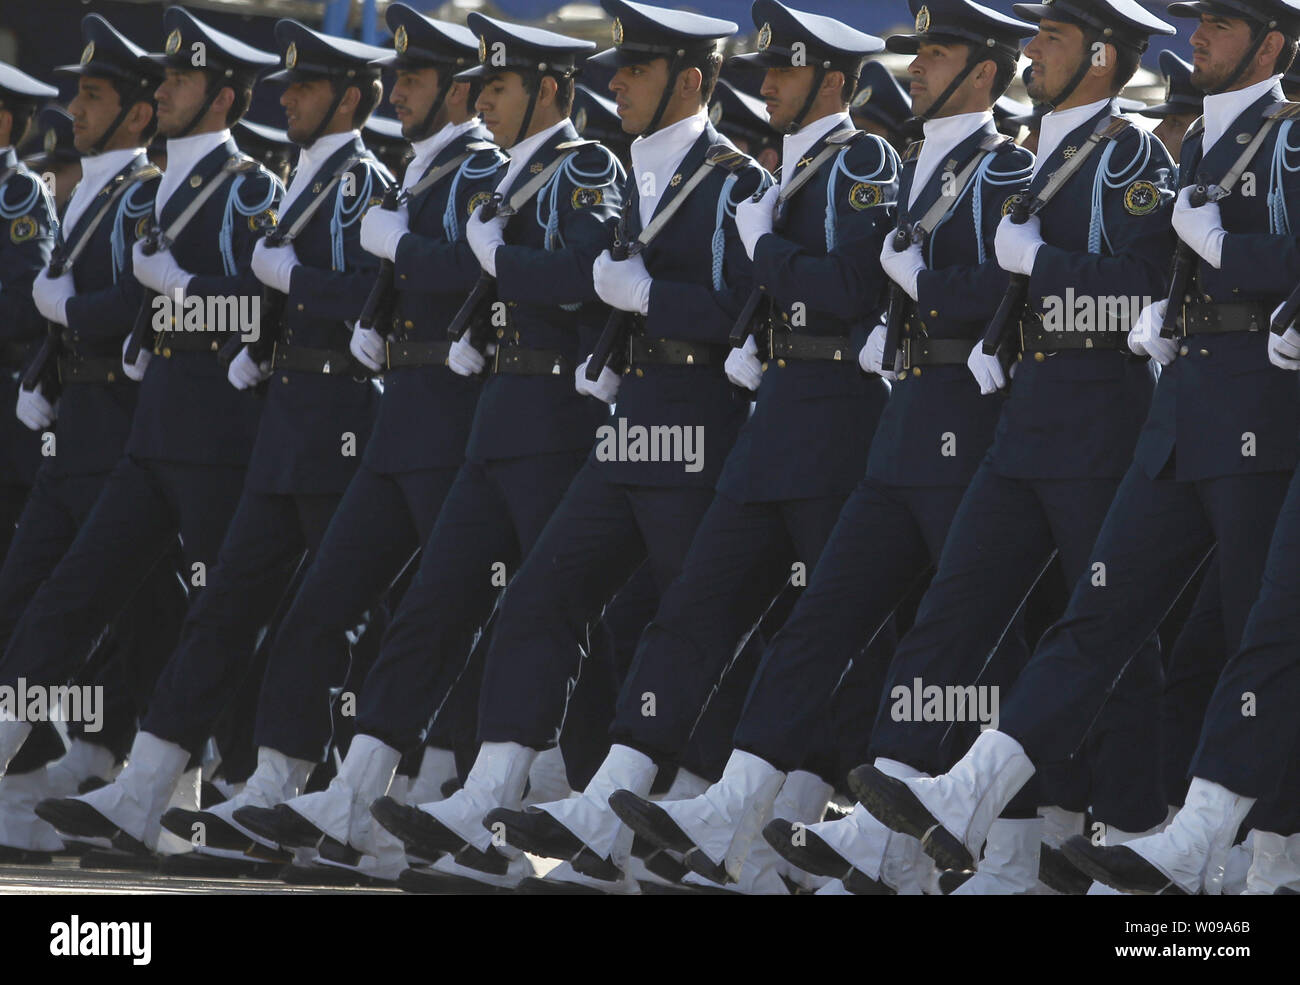 Iranian Army soldiers march during the National Army Day military parade in front of the mausoleum of the Iran's late leader Ayatollah Khomeini in Tehran, Iran on April 18, 2011. The Iranian President Mahmoud Ahmadinejad used the occasion to accuse the United States for sowing discord in the Middle East.    UPI/Maryam Rahmanian Stock Photo